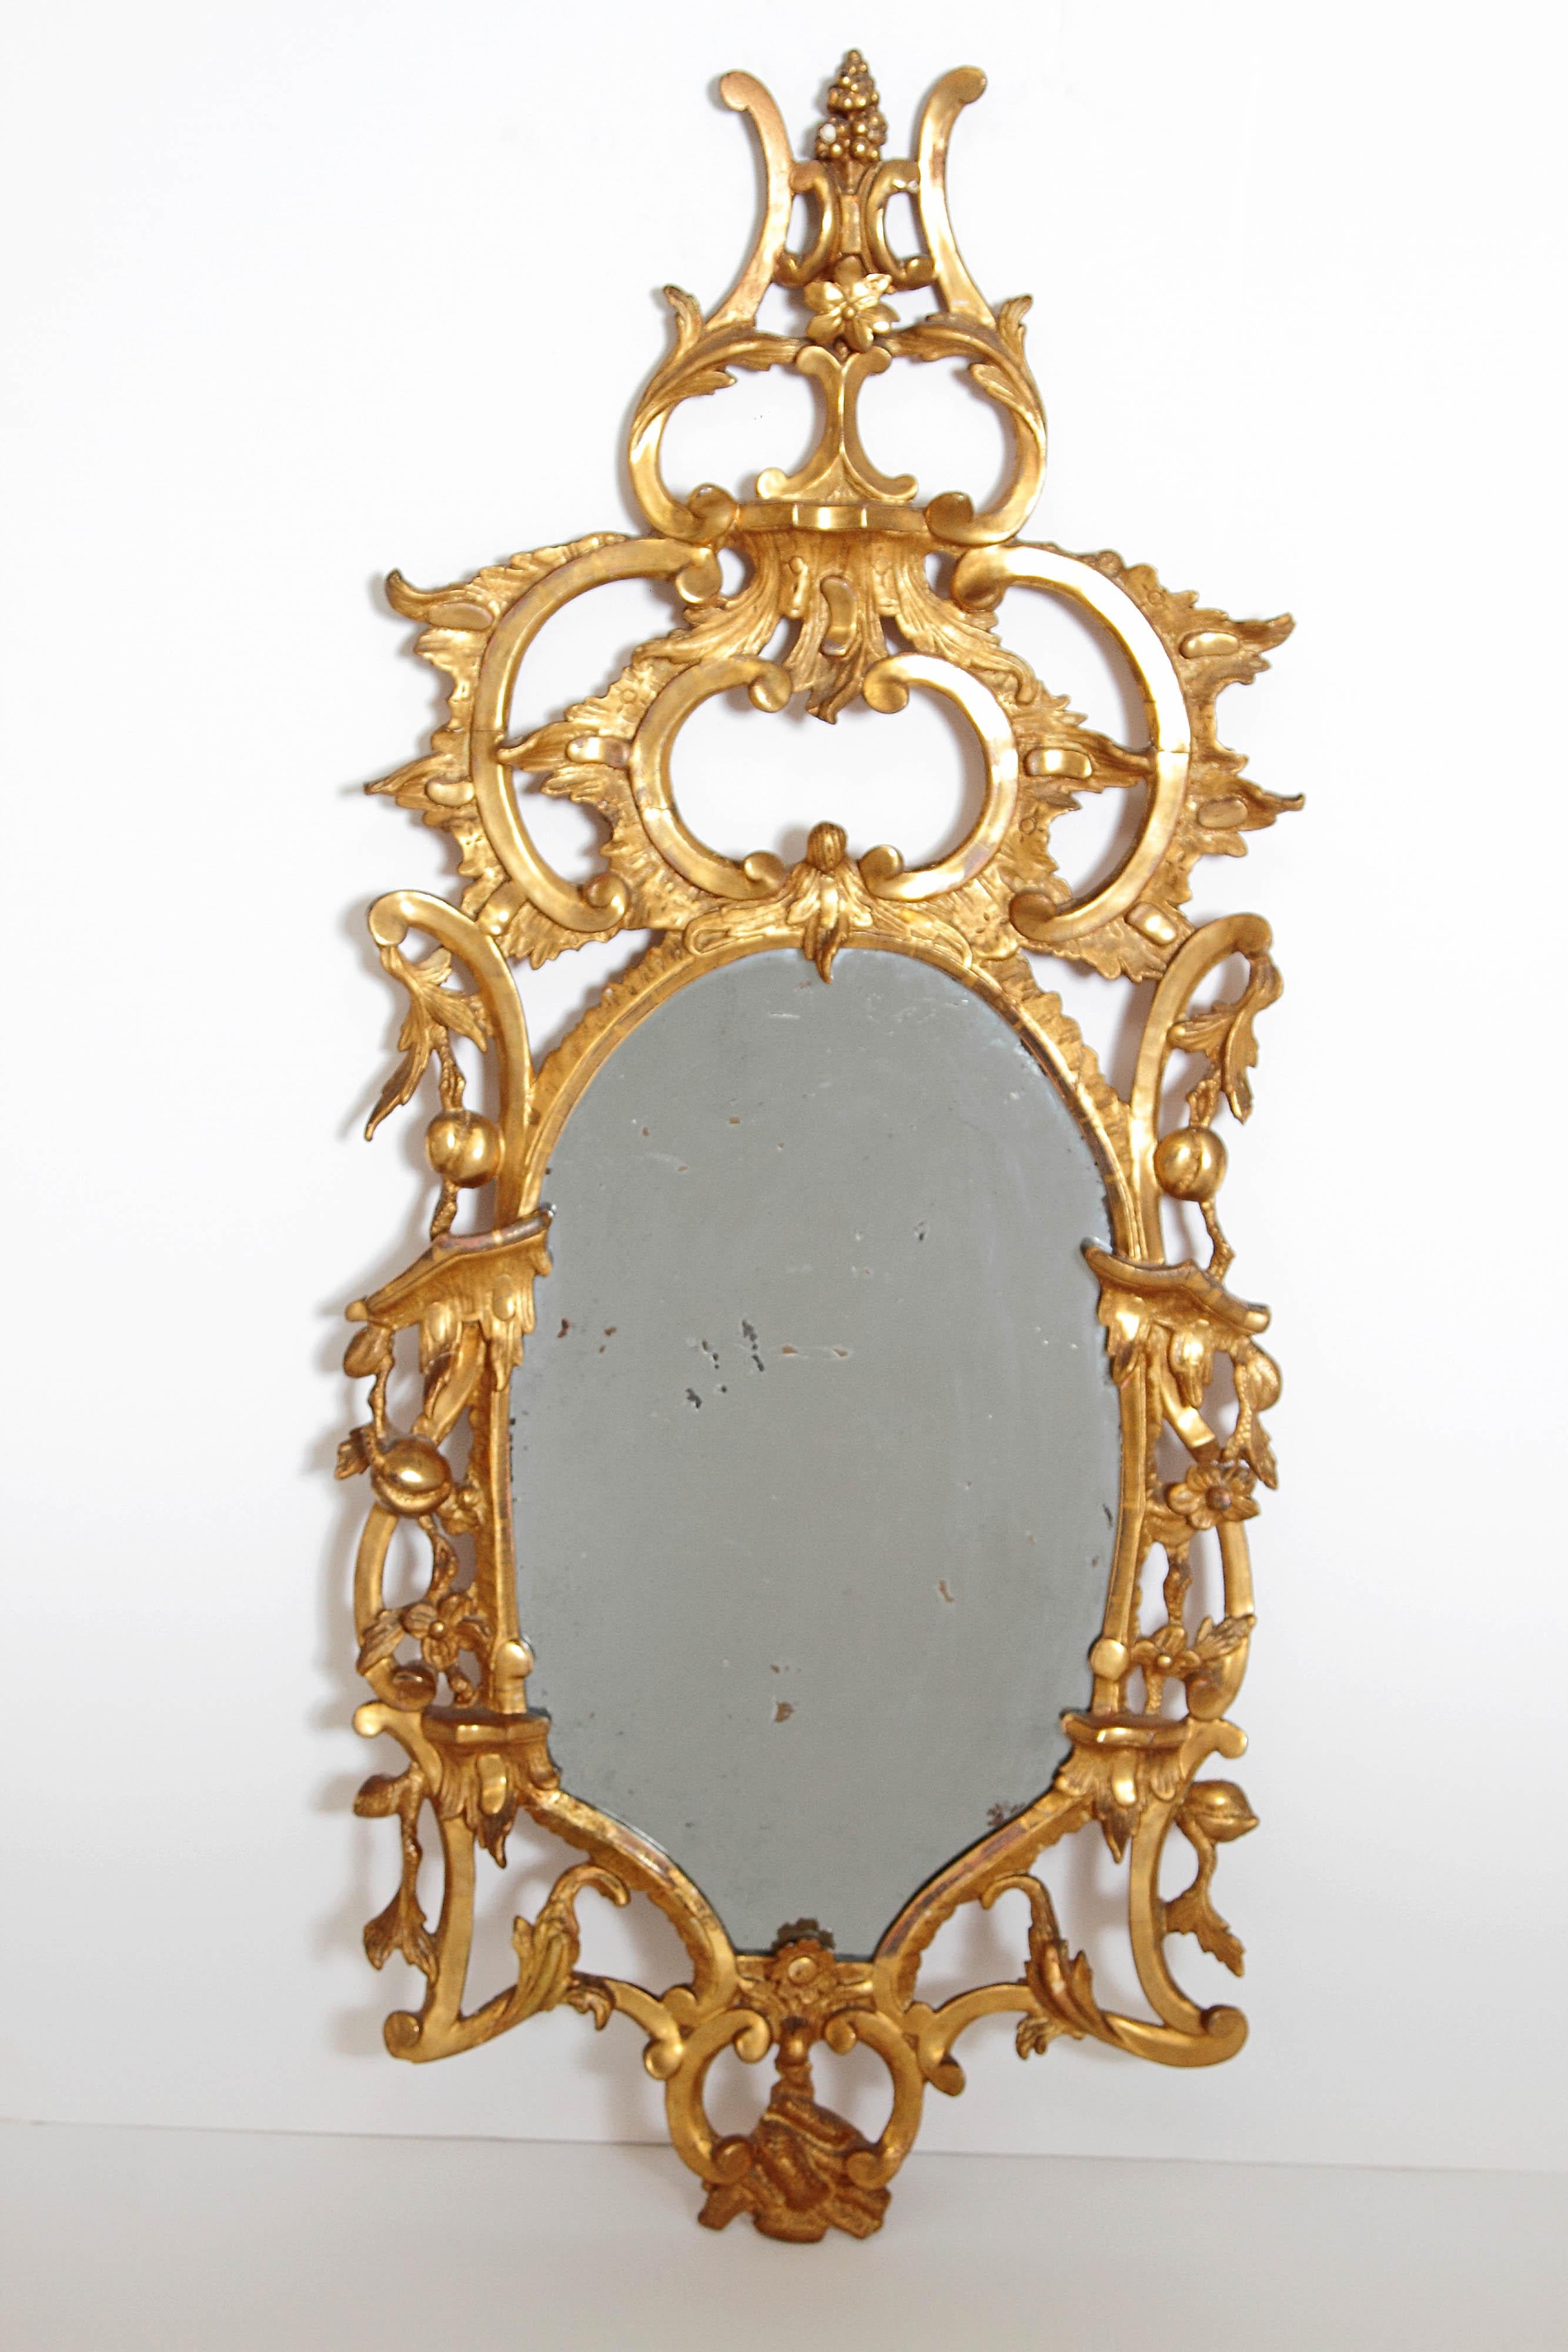 This elaborate 18th century English pier glass mirror is the ultimate statement piece. Masterfully carved with floral details, acanthus and C-scrolls, all surmounted by an architectural cresting with a finial. 18th century, England.